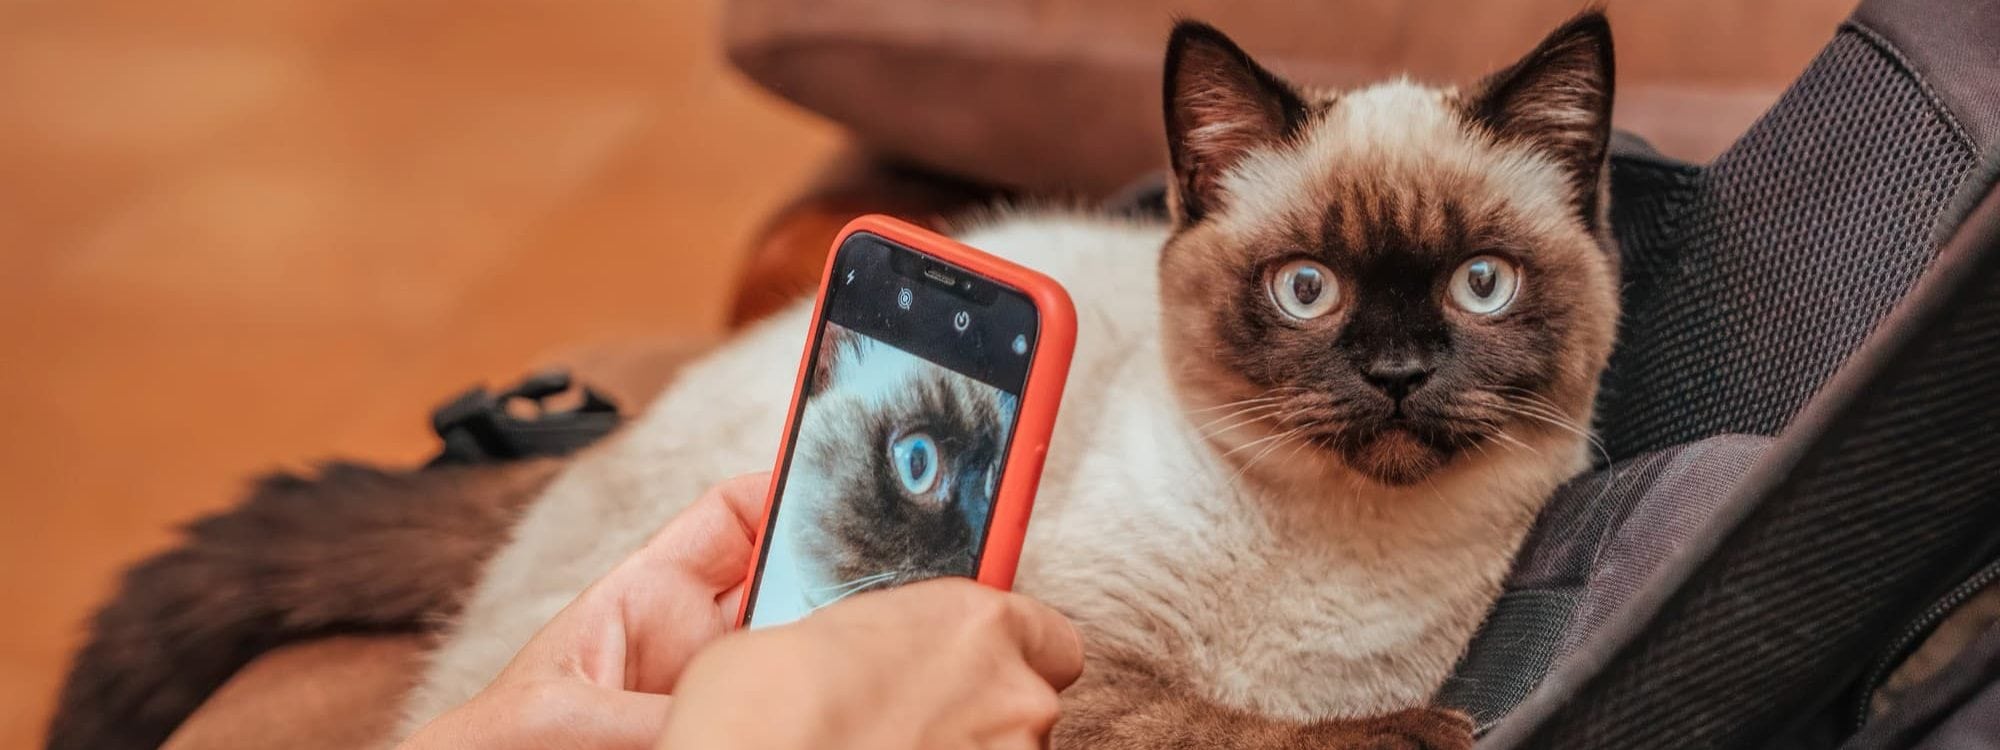 Person taking photo of a cat using phone